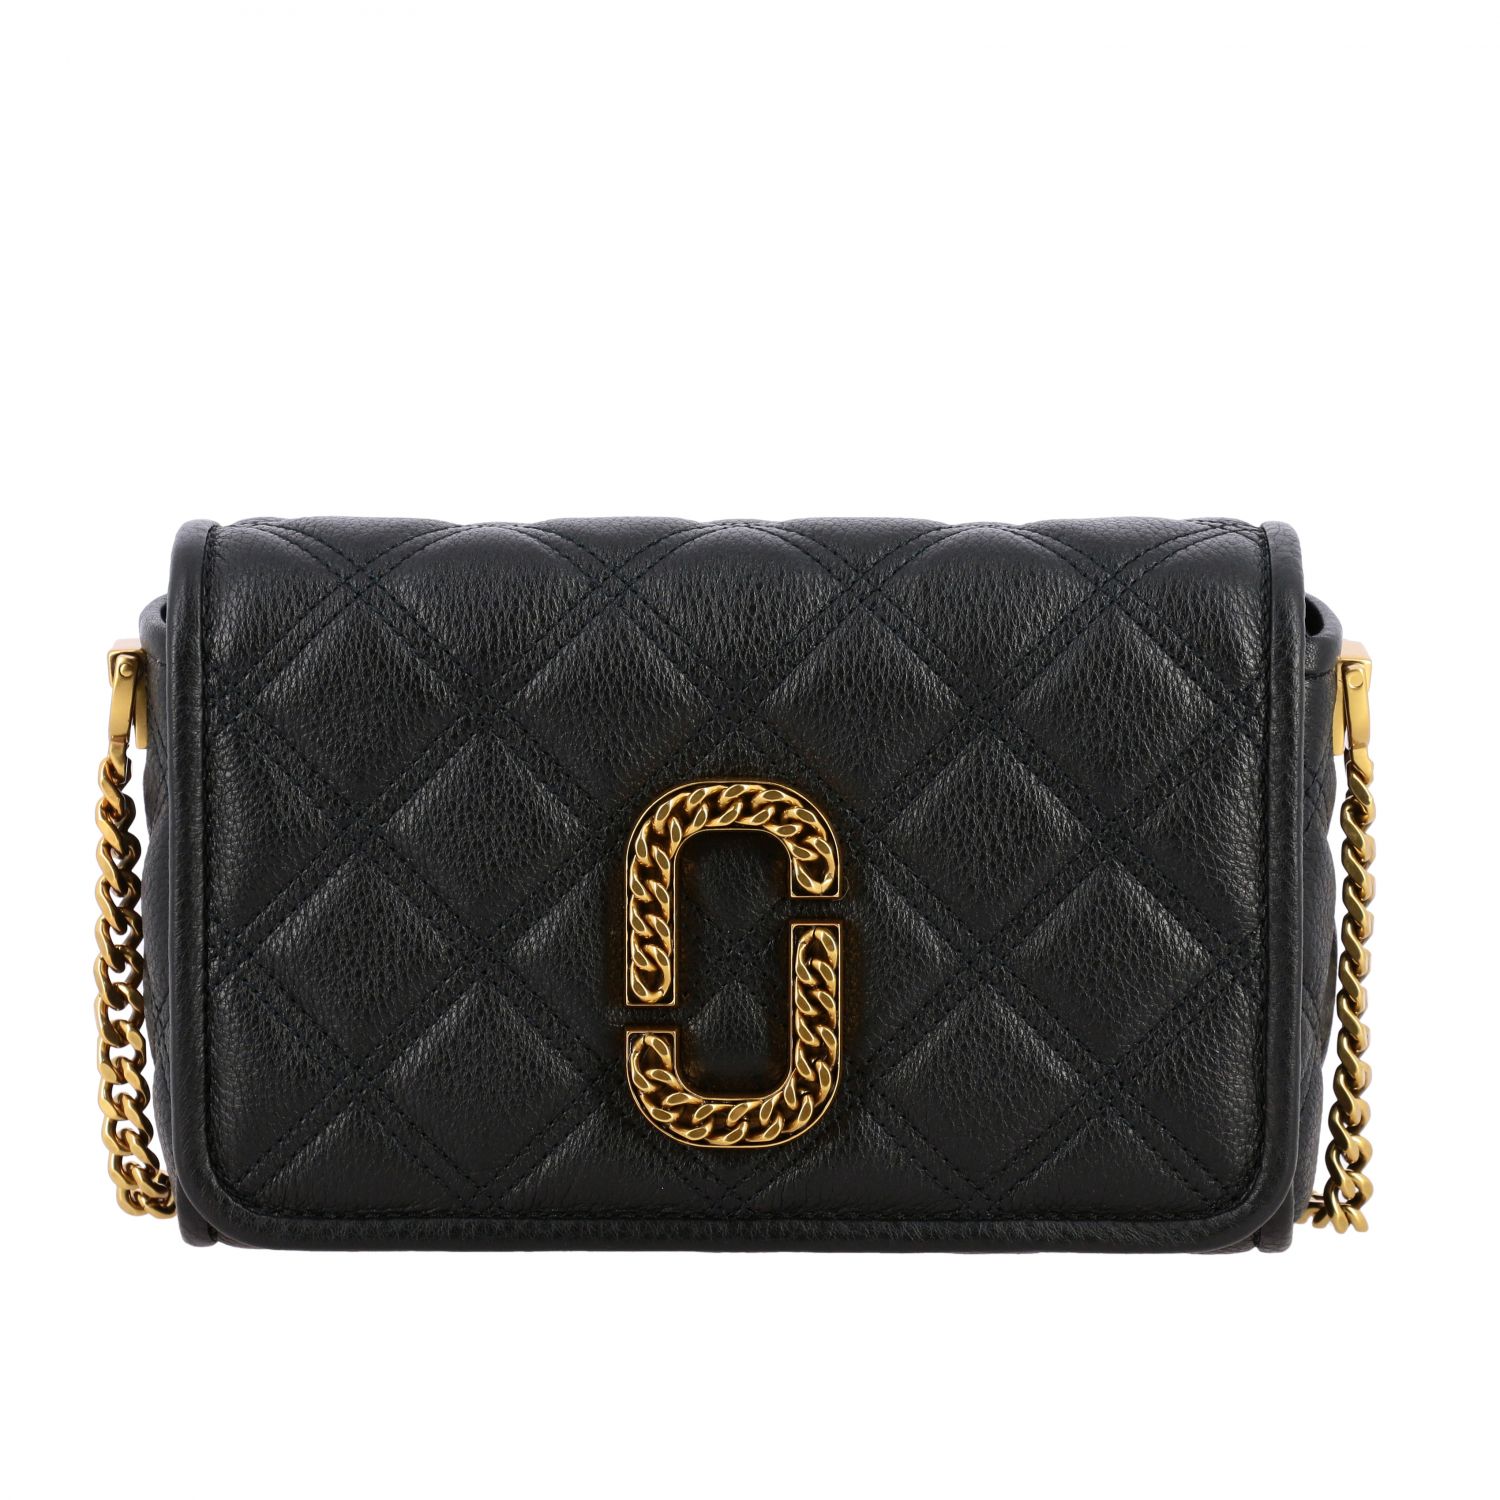 Marc Jacobs Shoulder Bags Clearance - Marc Jacobs Outlet USA